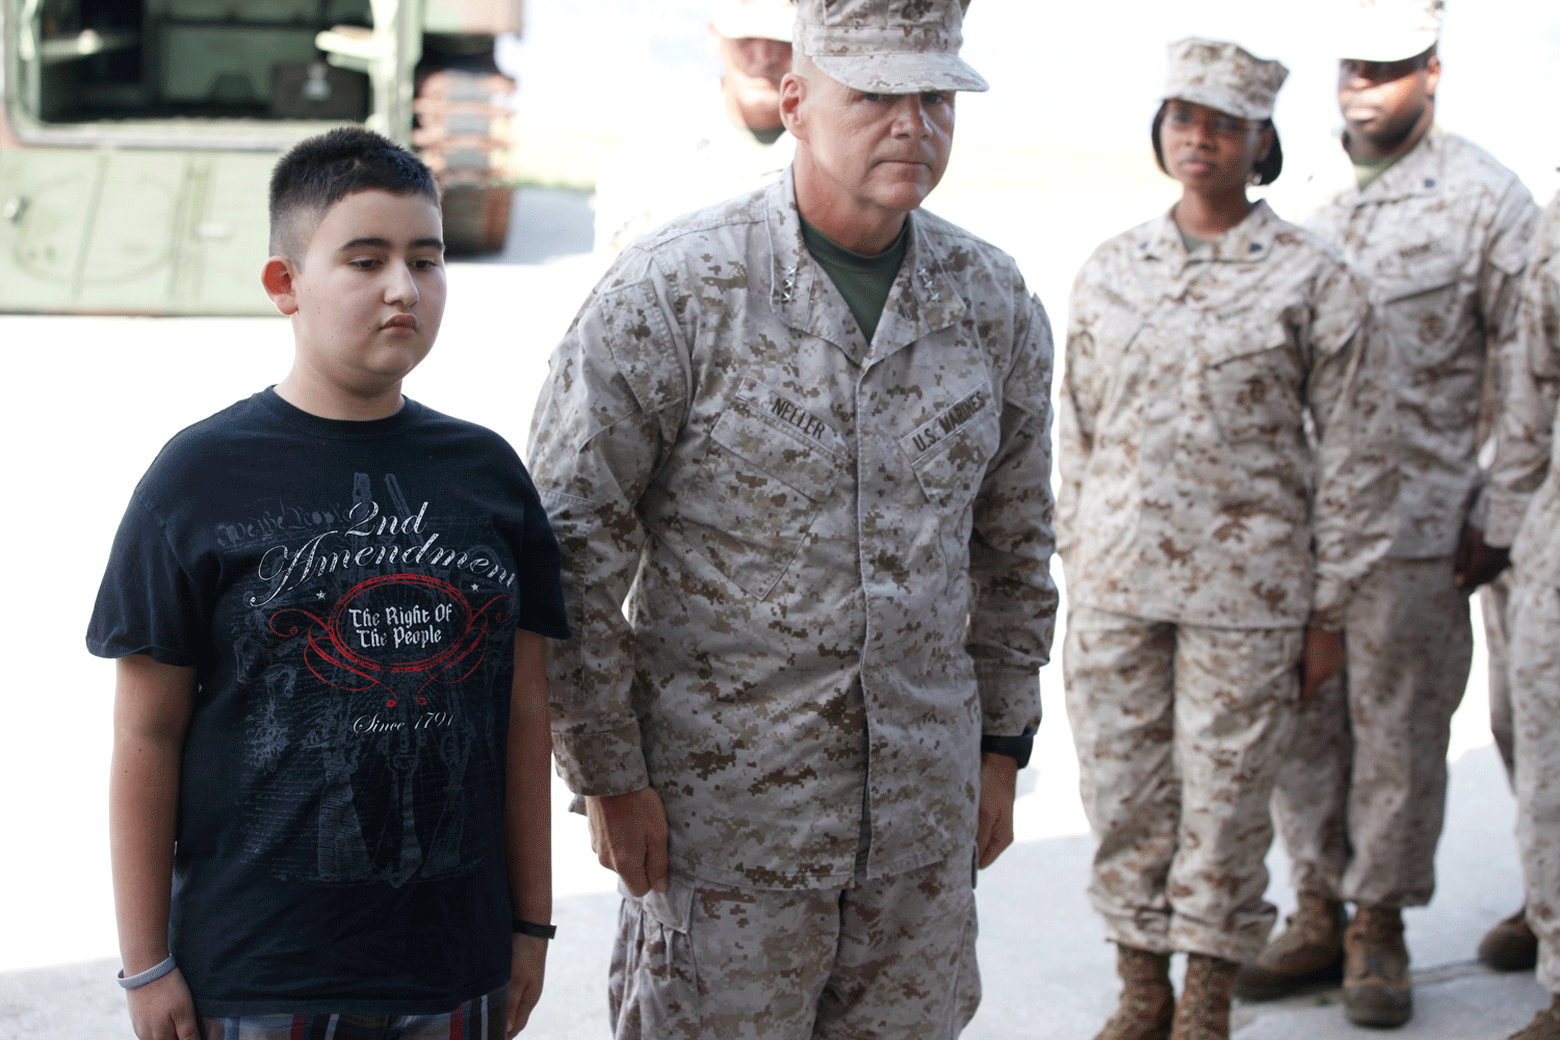 Ethan Arbelo is recognized as an honorary Marine during a ceremony on Oct. 31, 2013 at the headquarters of the 4th Marine Assault Amphibian Battalion, located in Tampa, Florida. (Courtesy of Maria Maldonado)